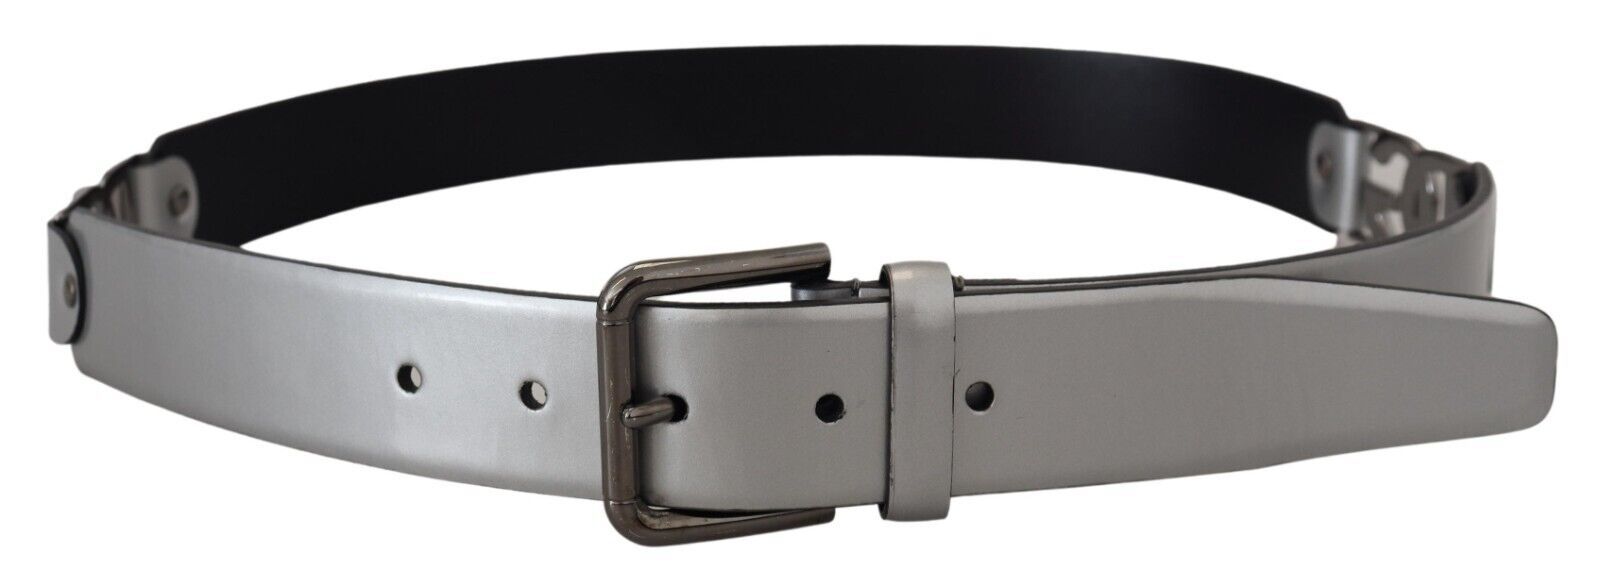 Dolce & Gabbana Chic Silver Leather Belt with Metal Buckle | Fashionsarah.com